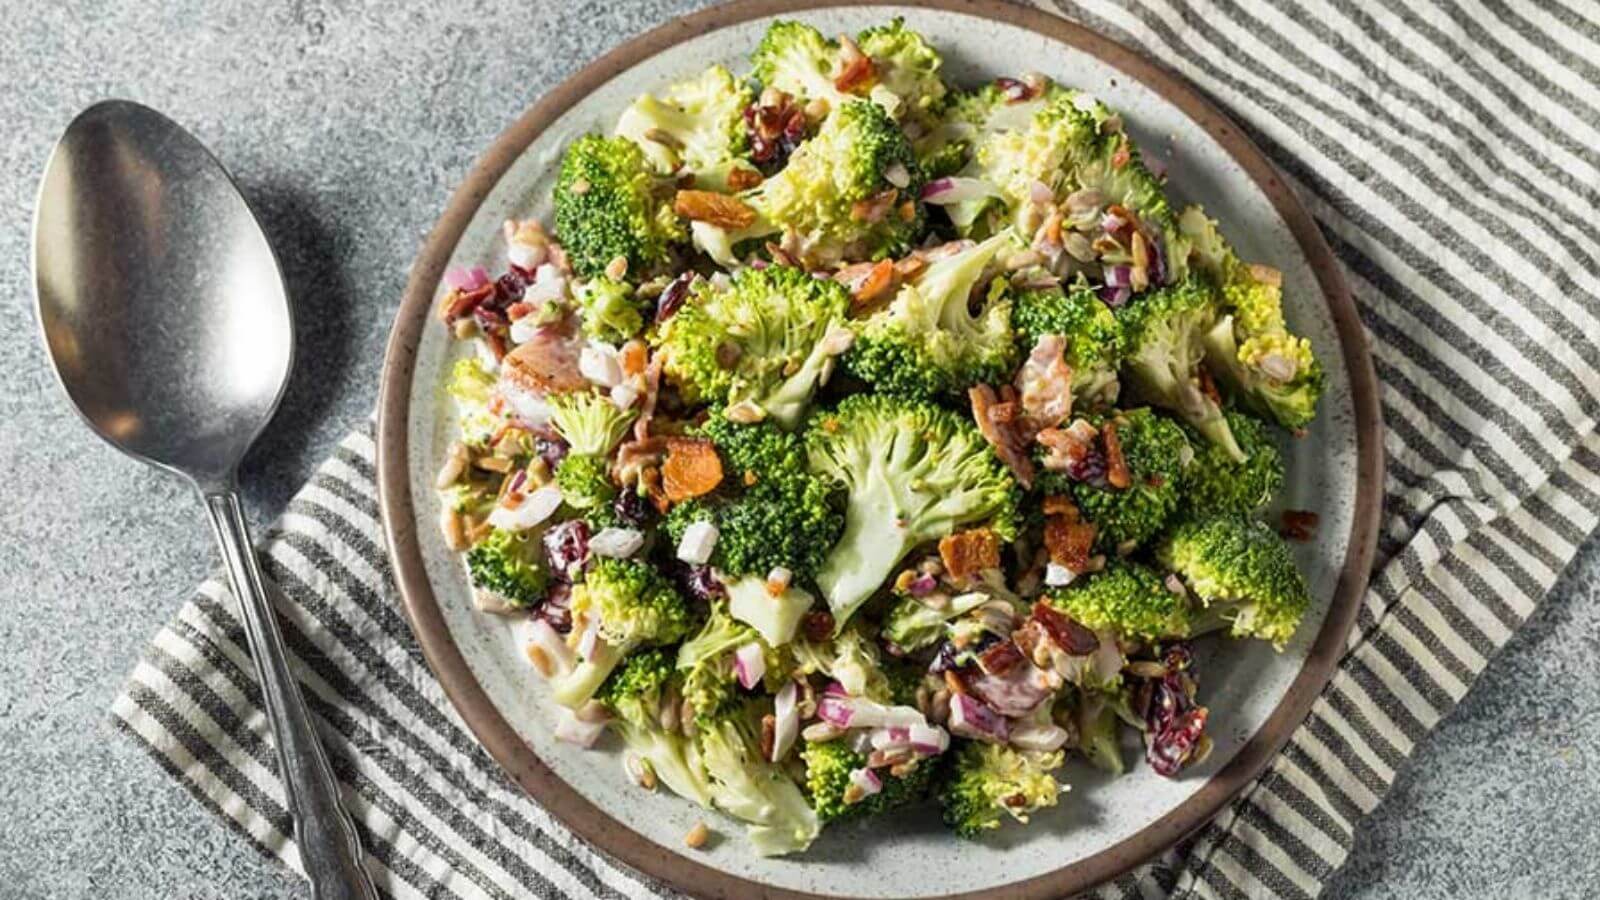 broccoli salad with bacon bits and raisins on a plate